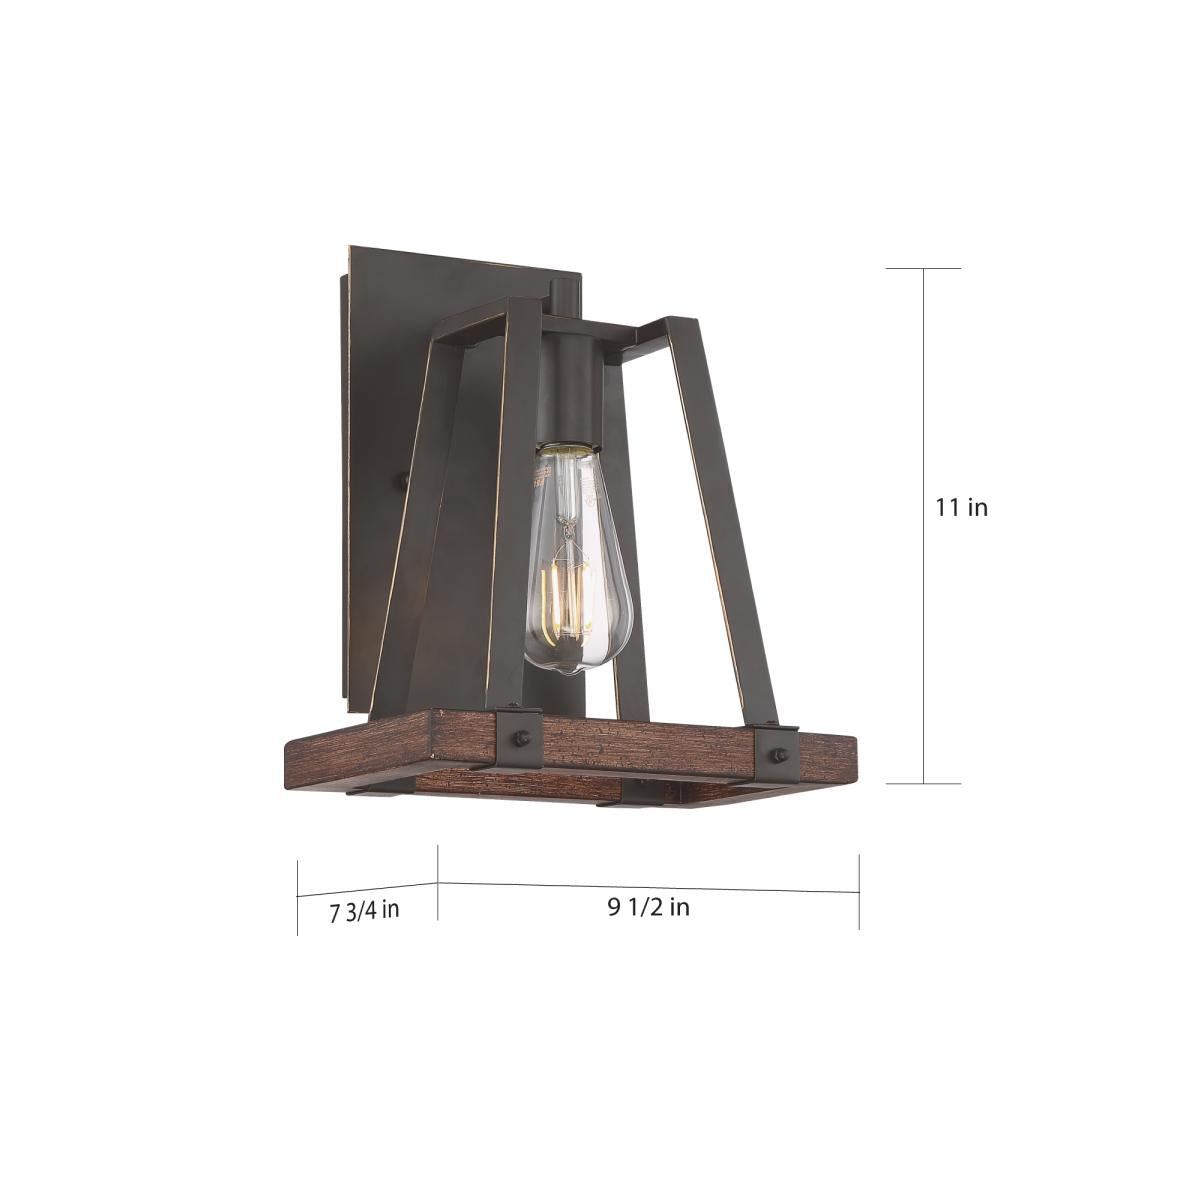 Outrigger - 1 Light Wall Sconce with Mahogany Bronze and Nutmeg Wood Finish